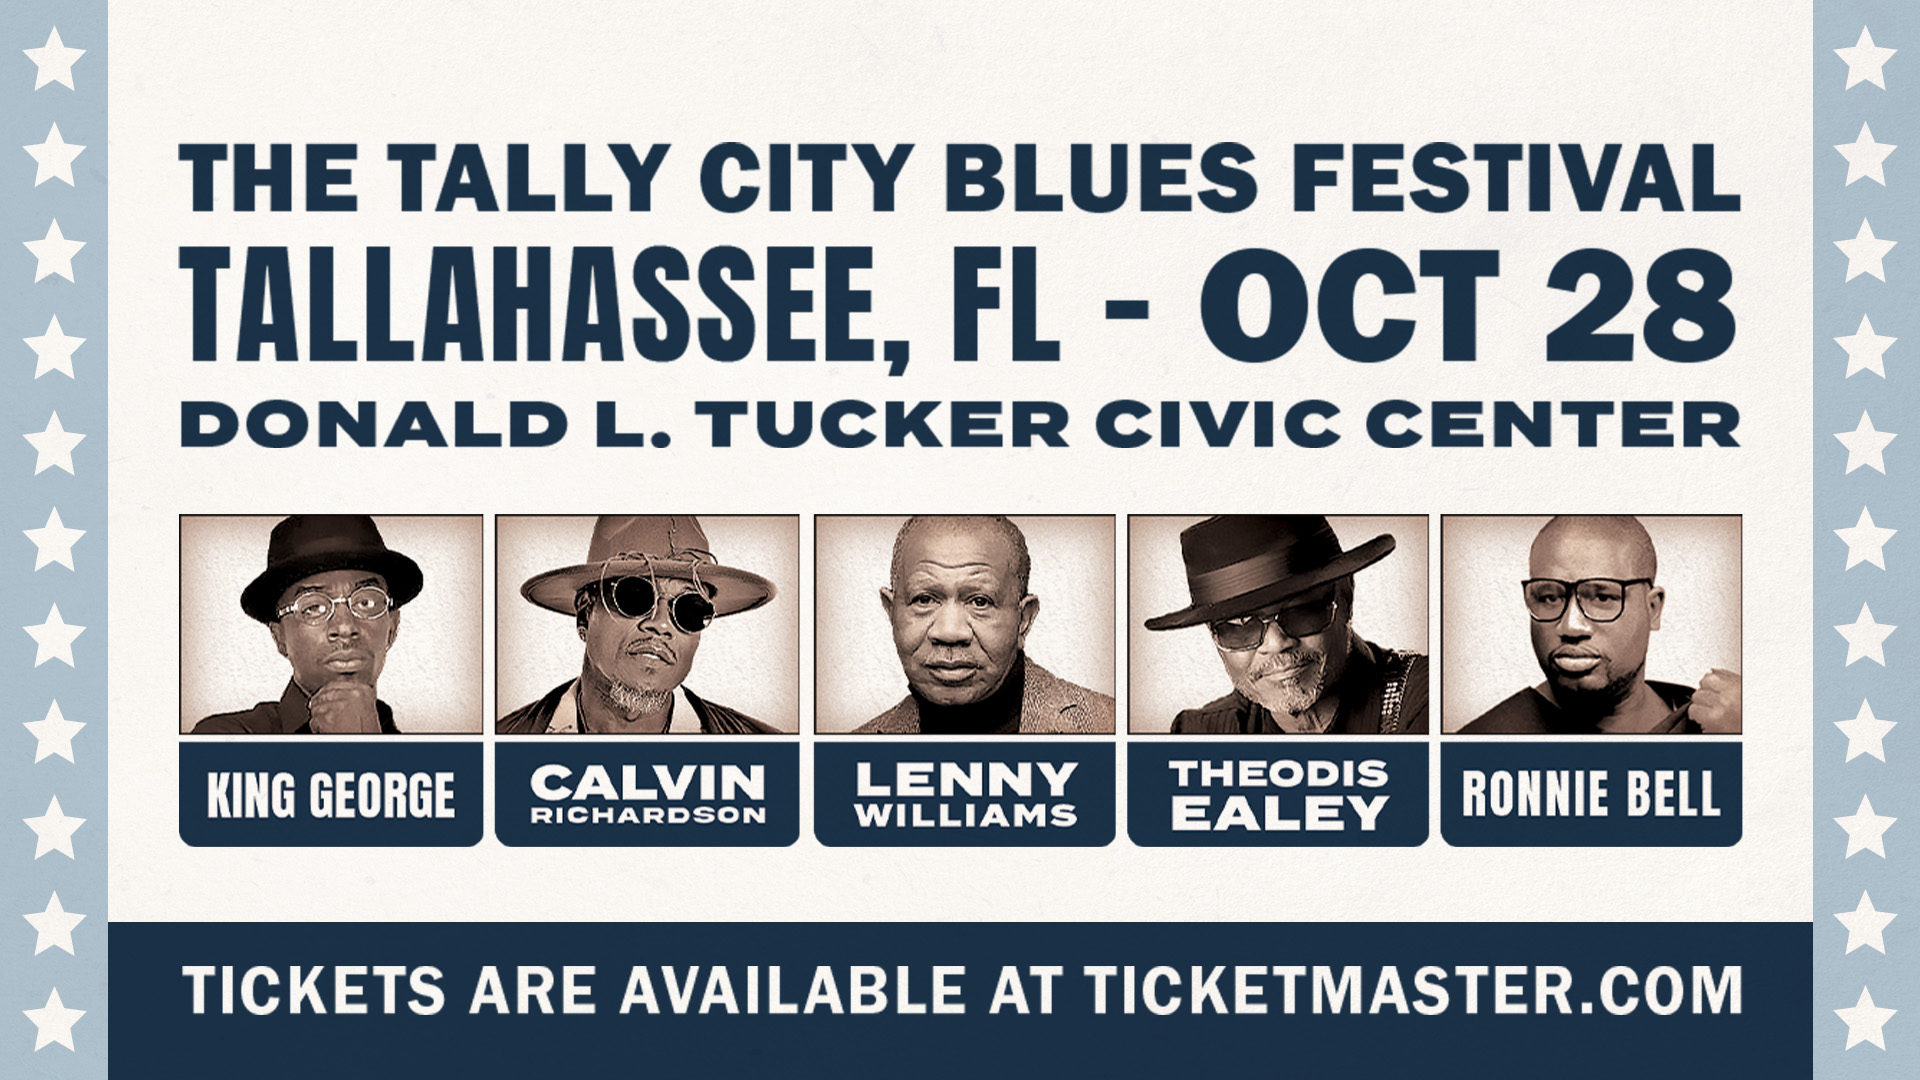 LISTEN TO WIN TICKETS TO THE TALLY CITY BLUES FESTIVAL